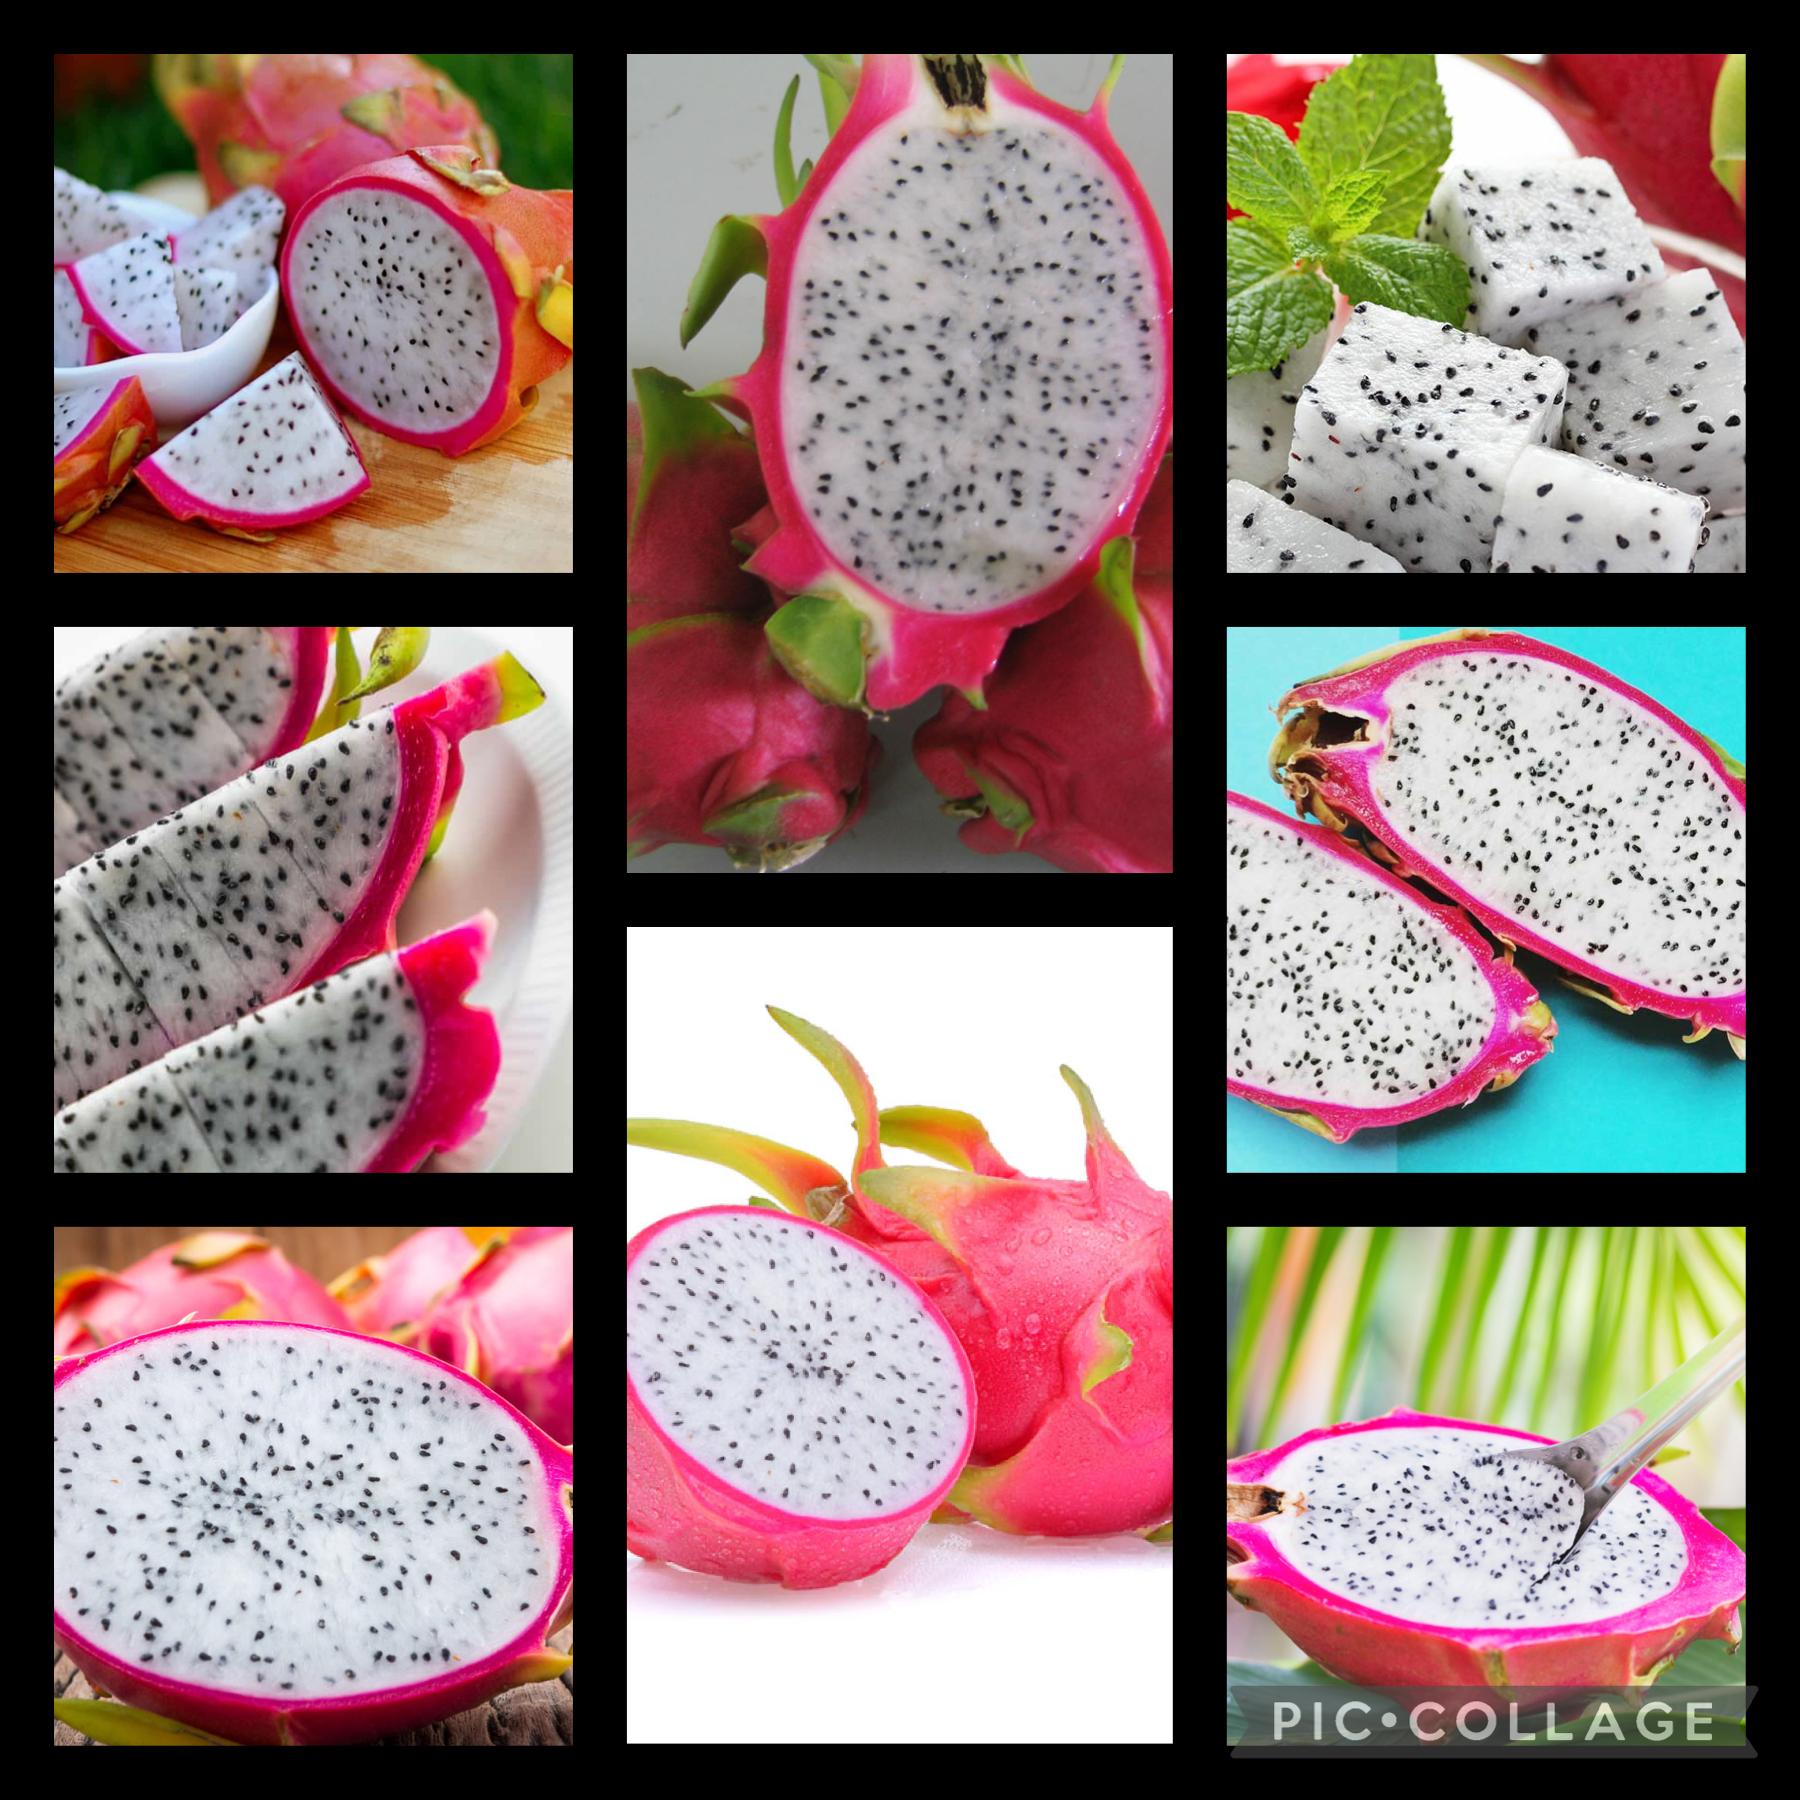 Like if you have ever ate or seen dragon fruit!